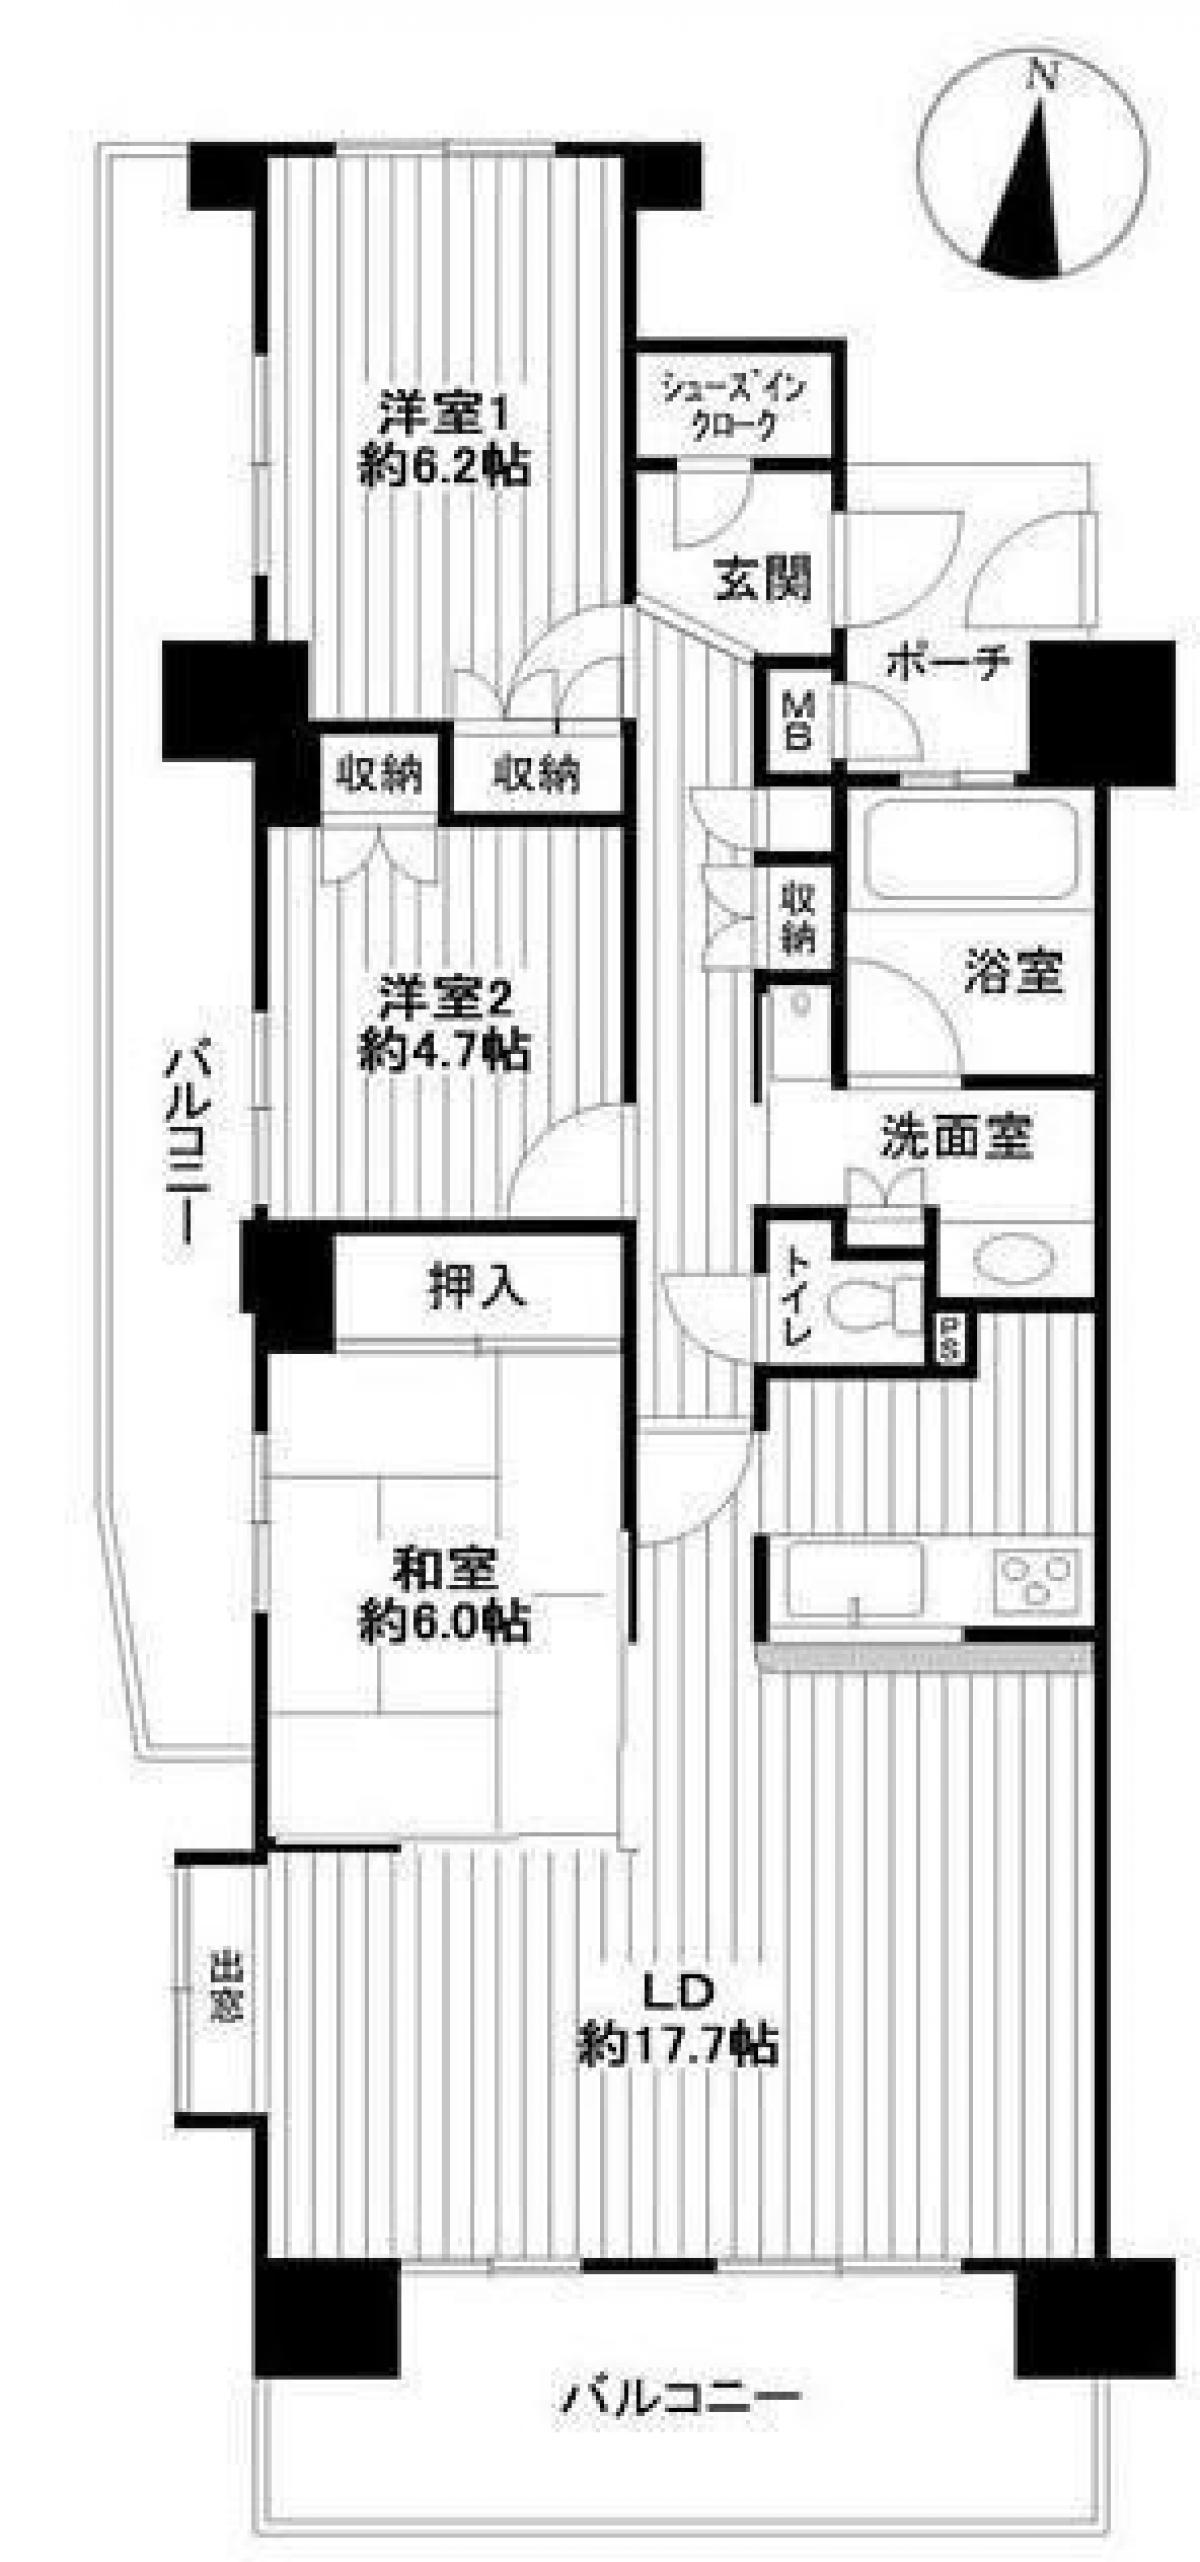 Picture of Apartment For Sale in Musashimurayama Shi, Tokyo, Japan